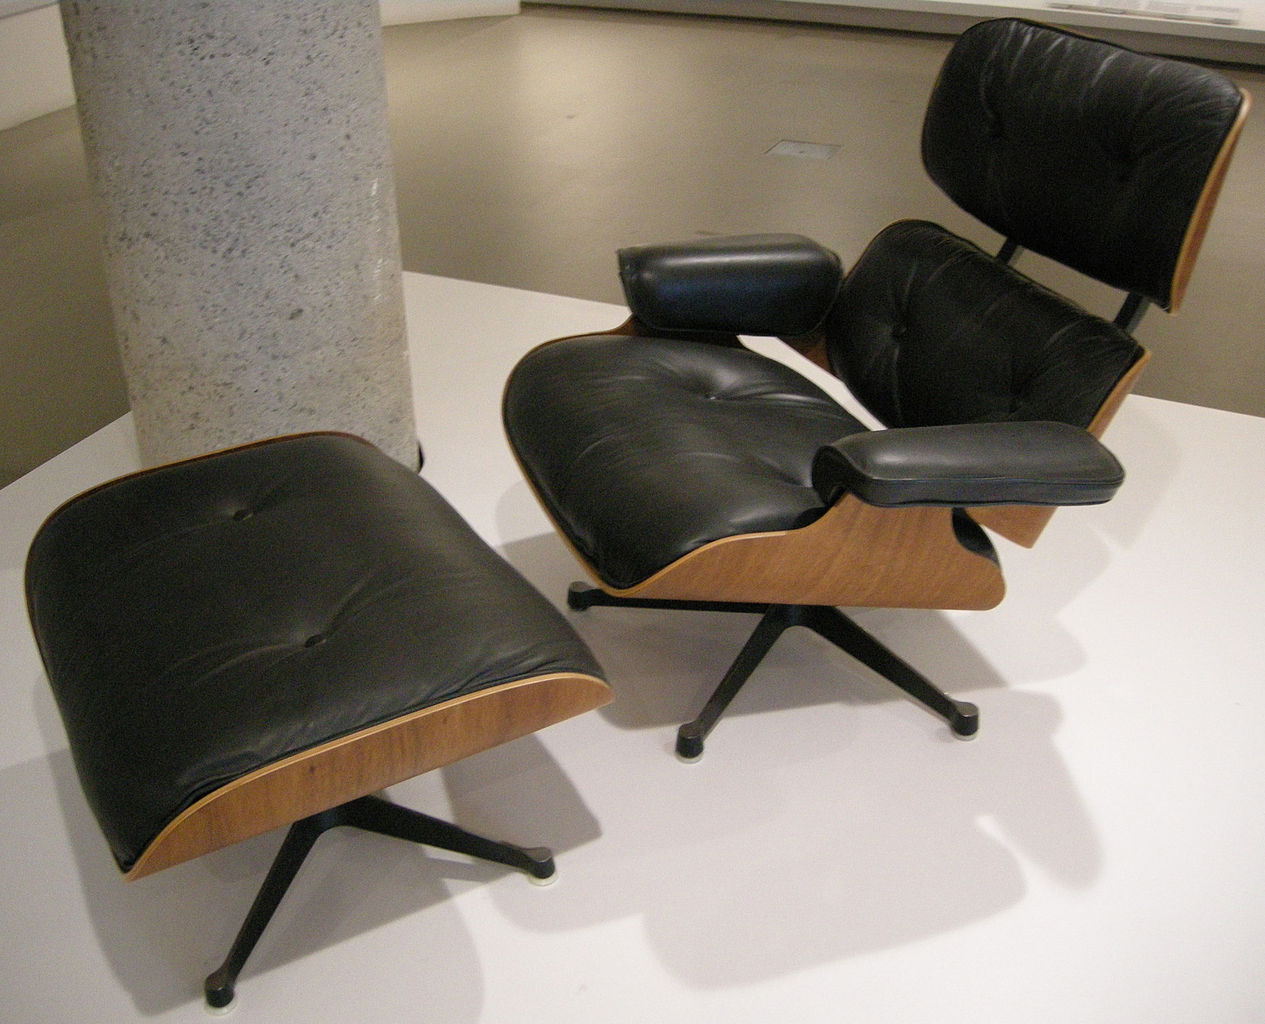 Eames Lounge Chair 670 by Charles and Ray Eames, United States, 1956